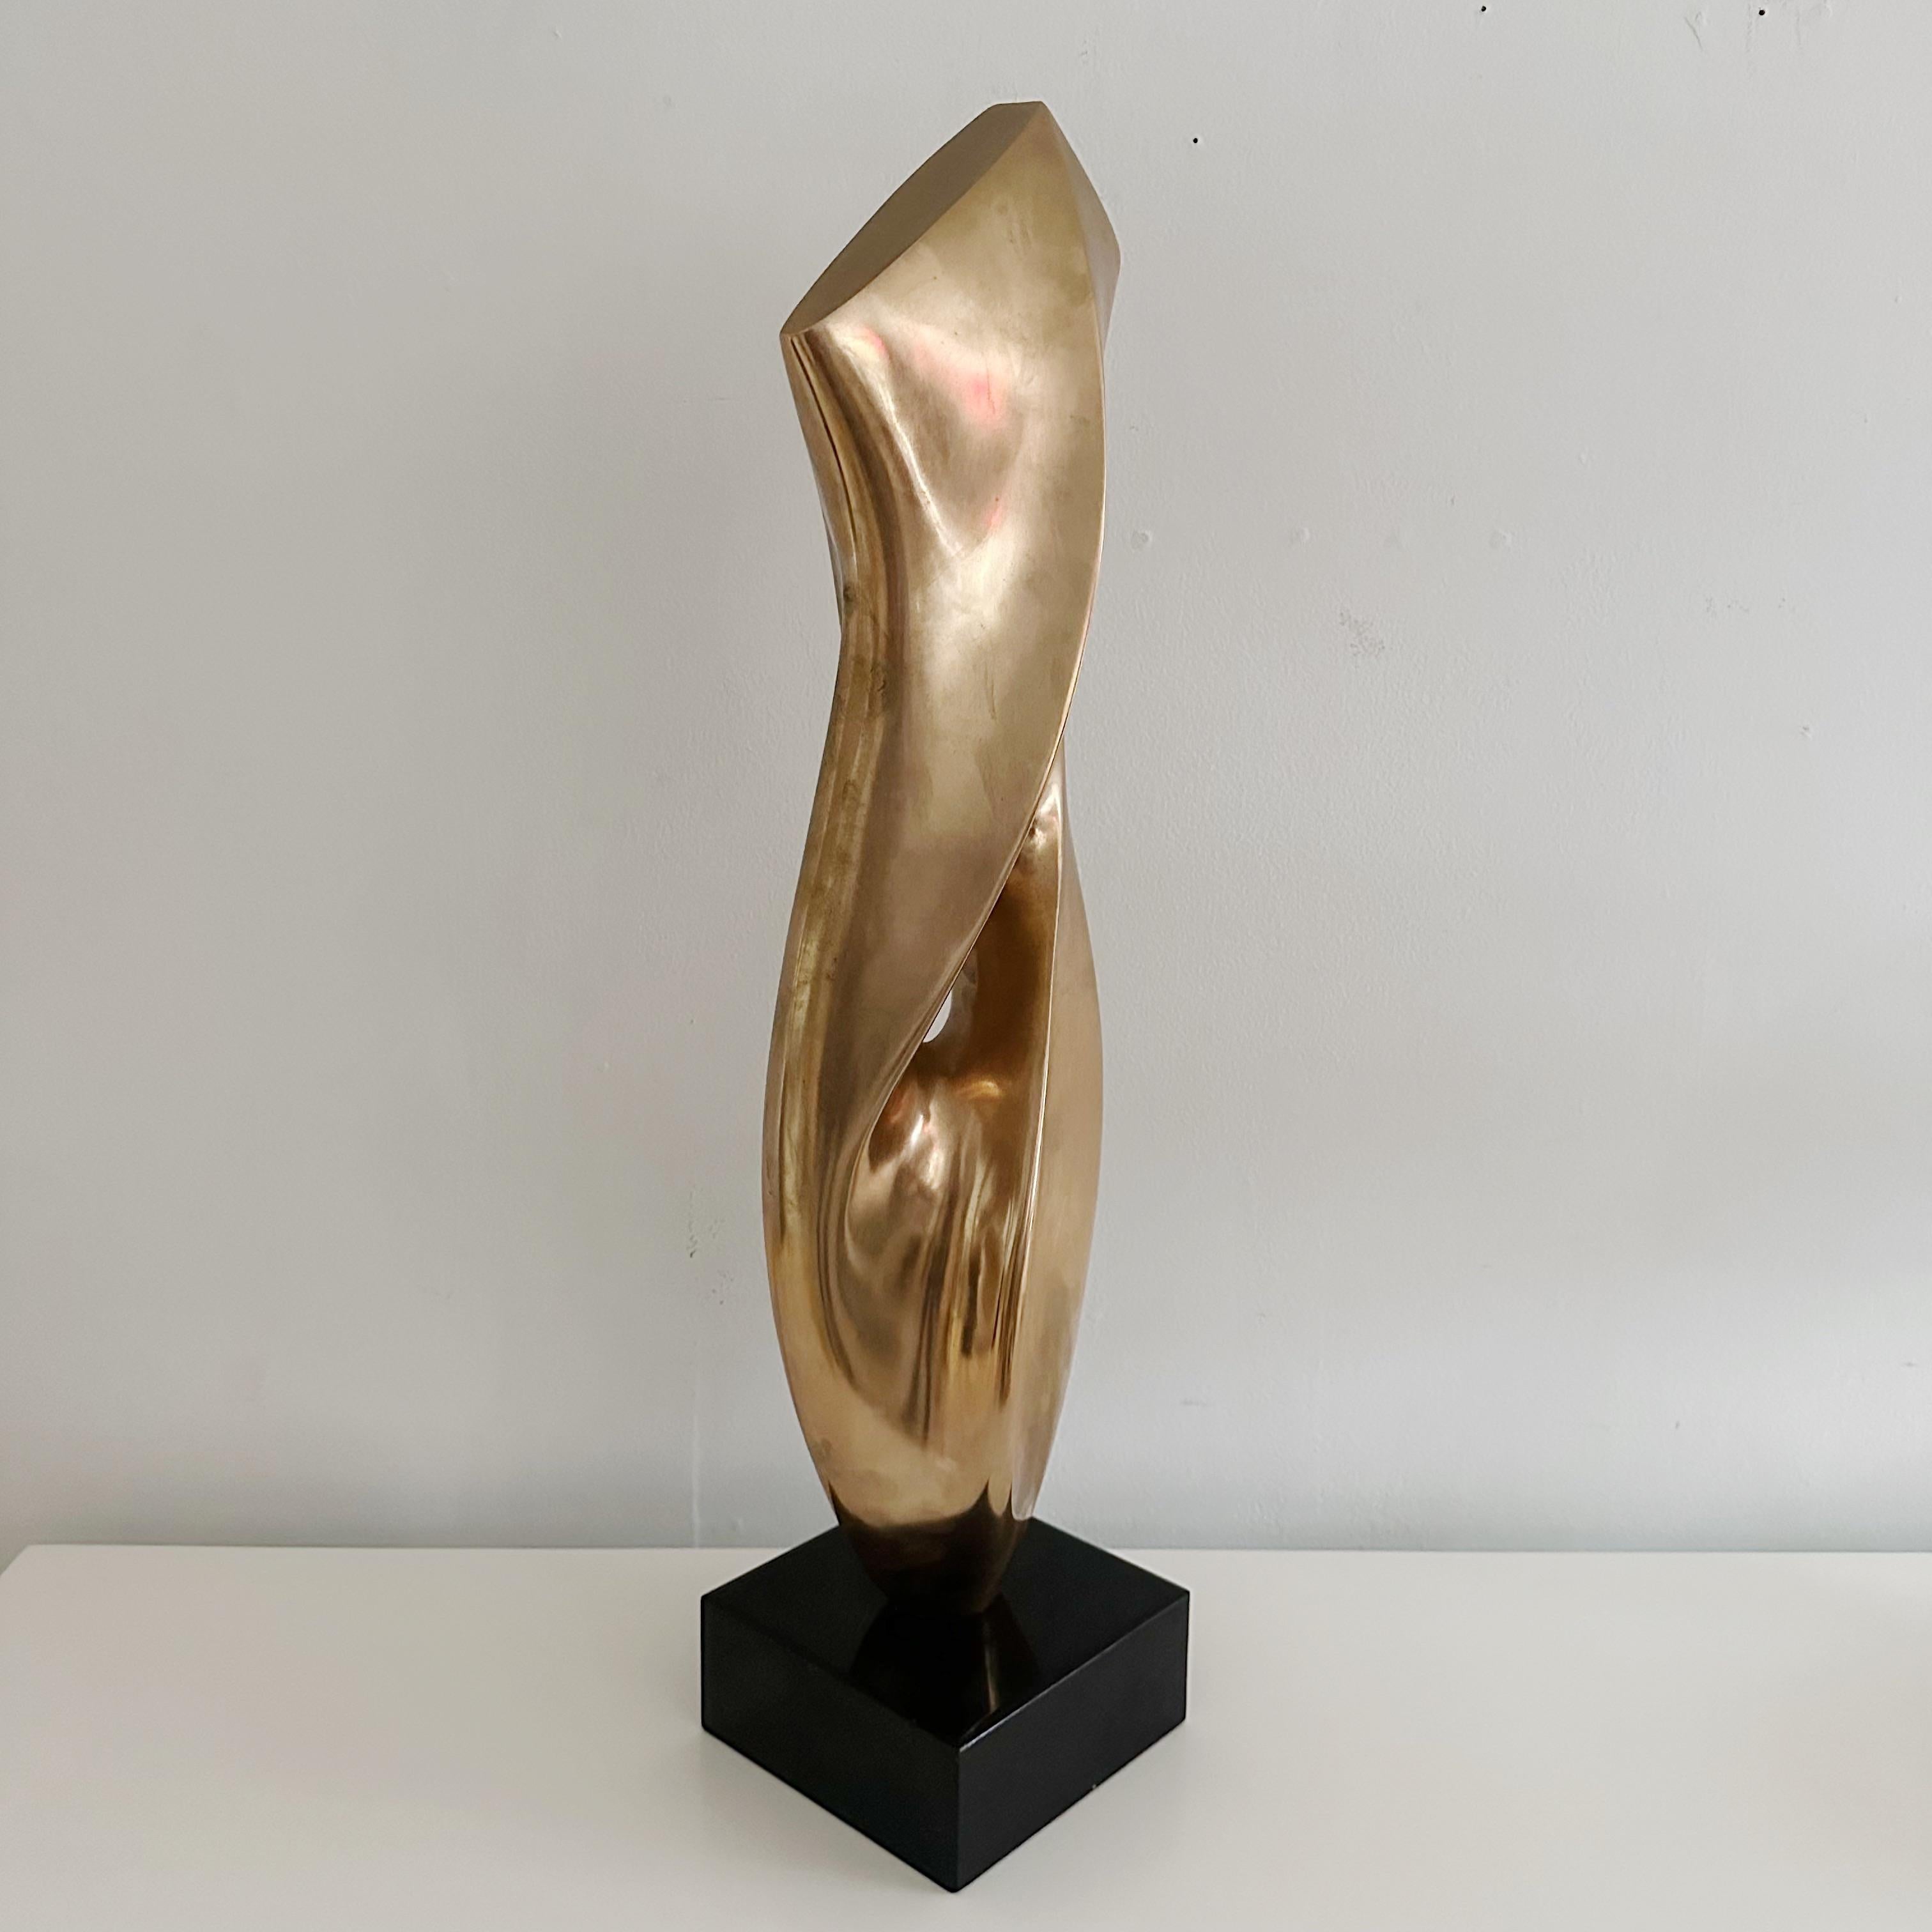 This is an earlier piece by world renowned artist Antonio Kieff,  quite large and very heavy solid bronze from 1974, signed in an edition of 5 of 5 1974,  mounted on a black granite base. Granite base measure 7' x 7